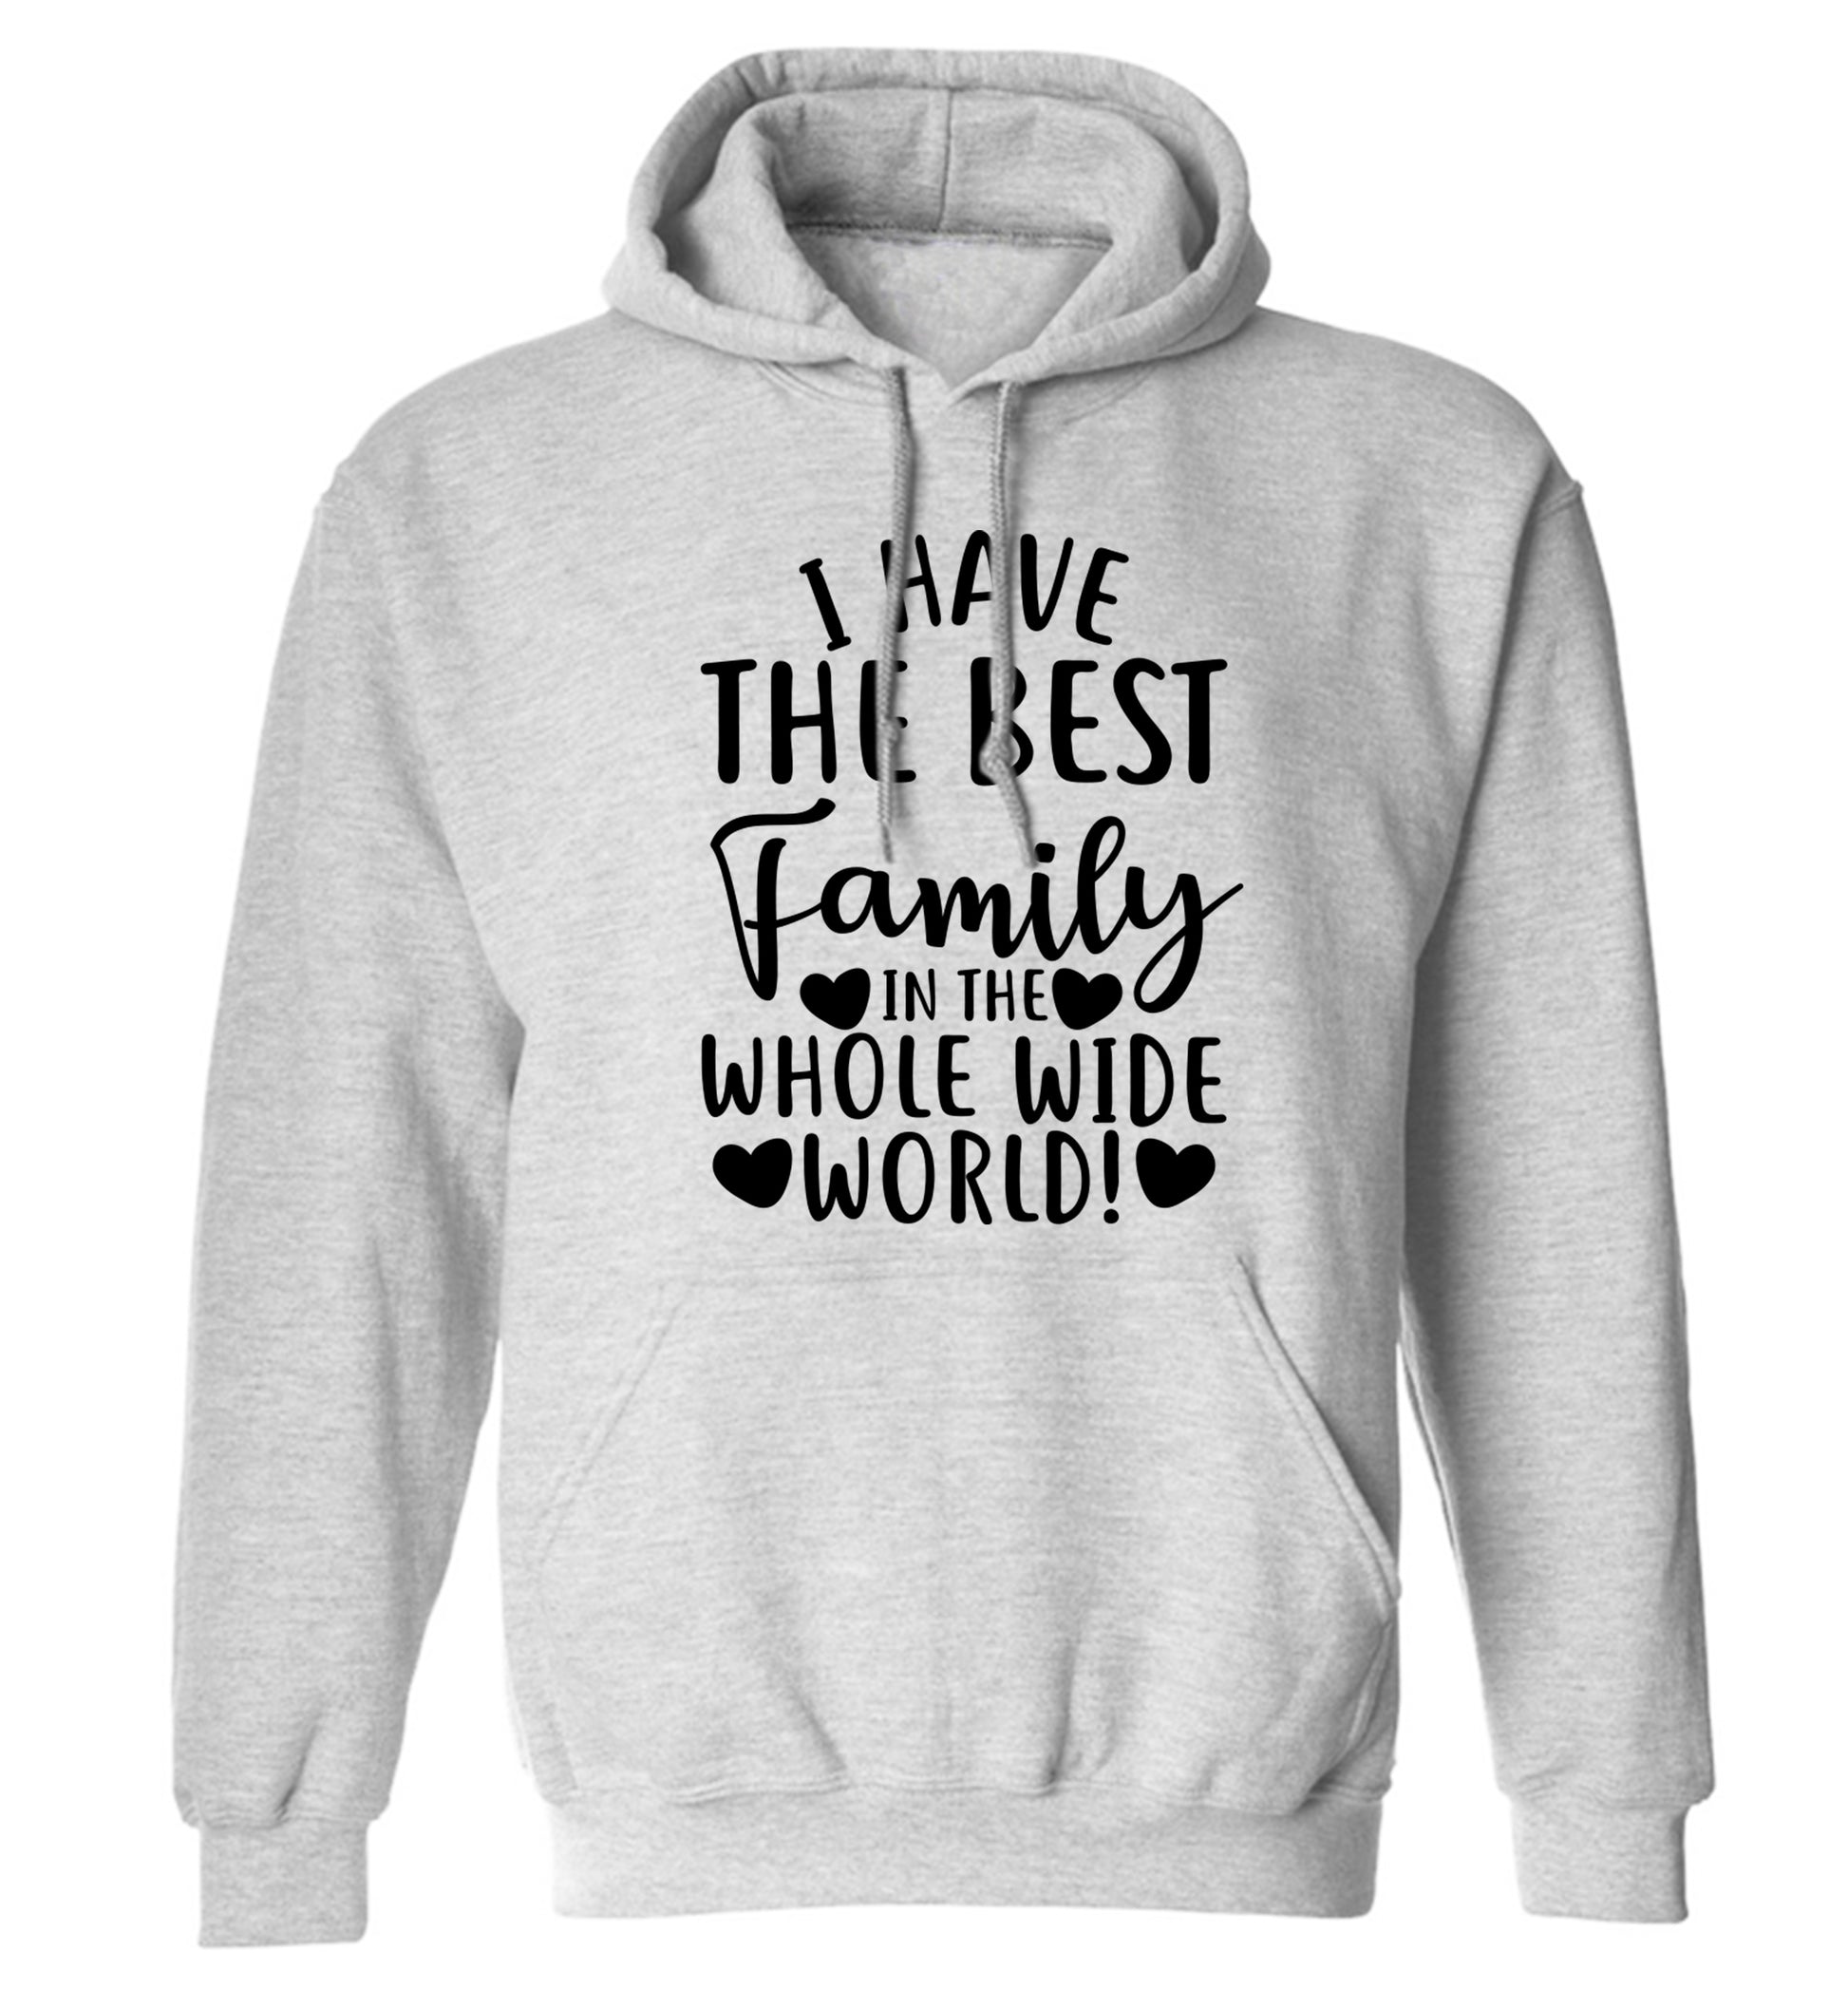 I have the best family in the whole wide world! adults unisex grey hoodie 2XL